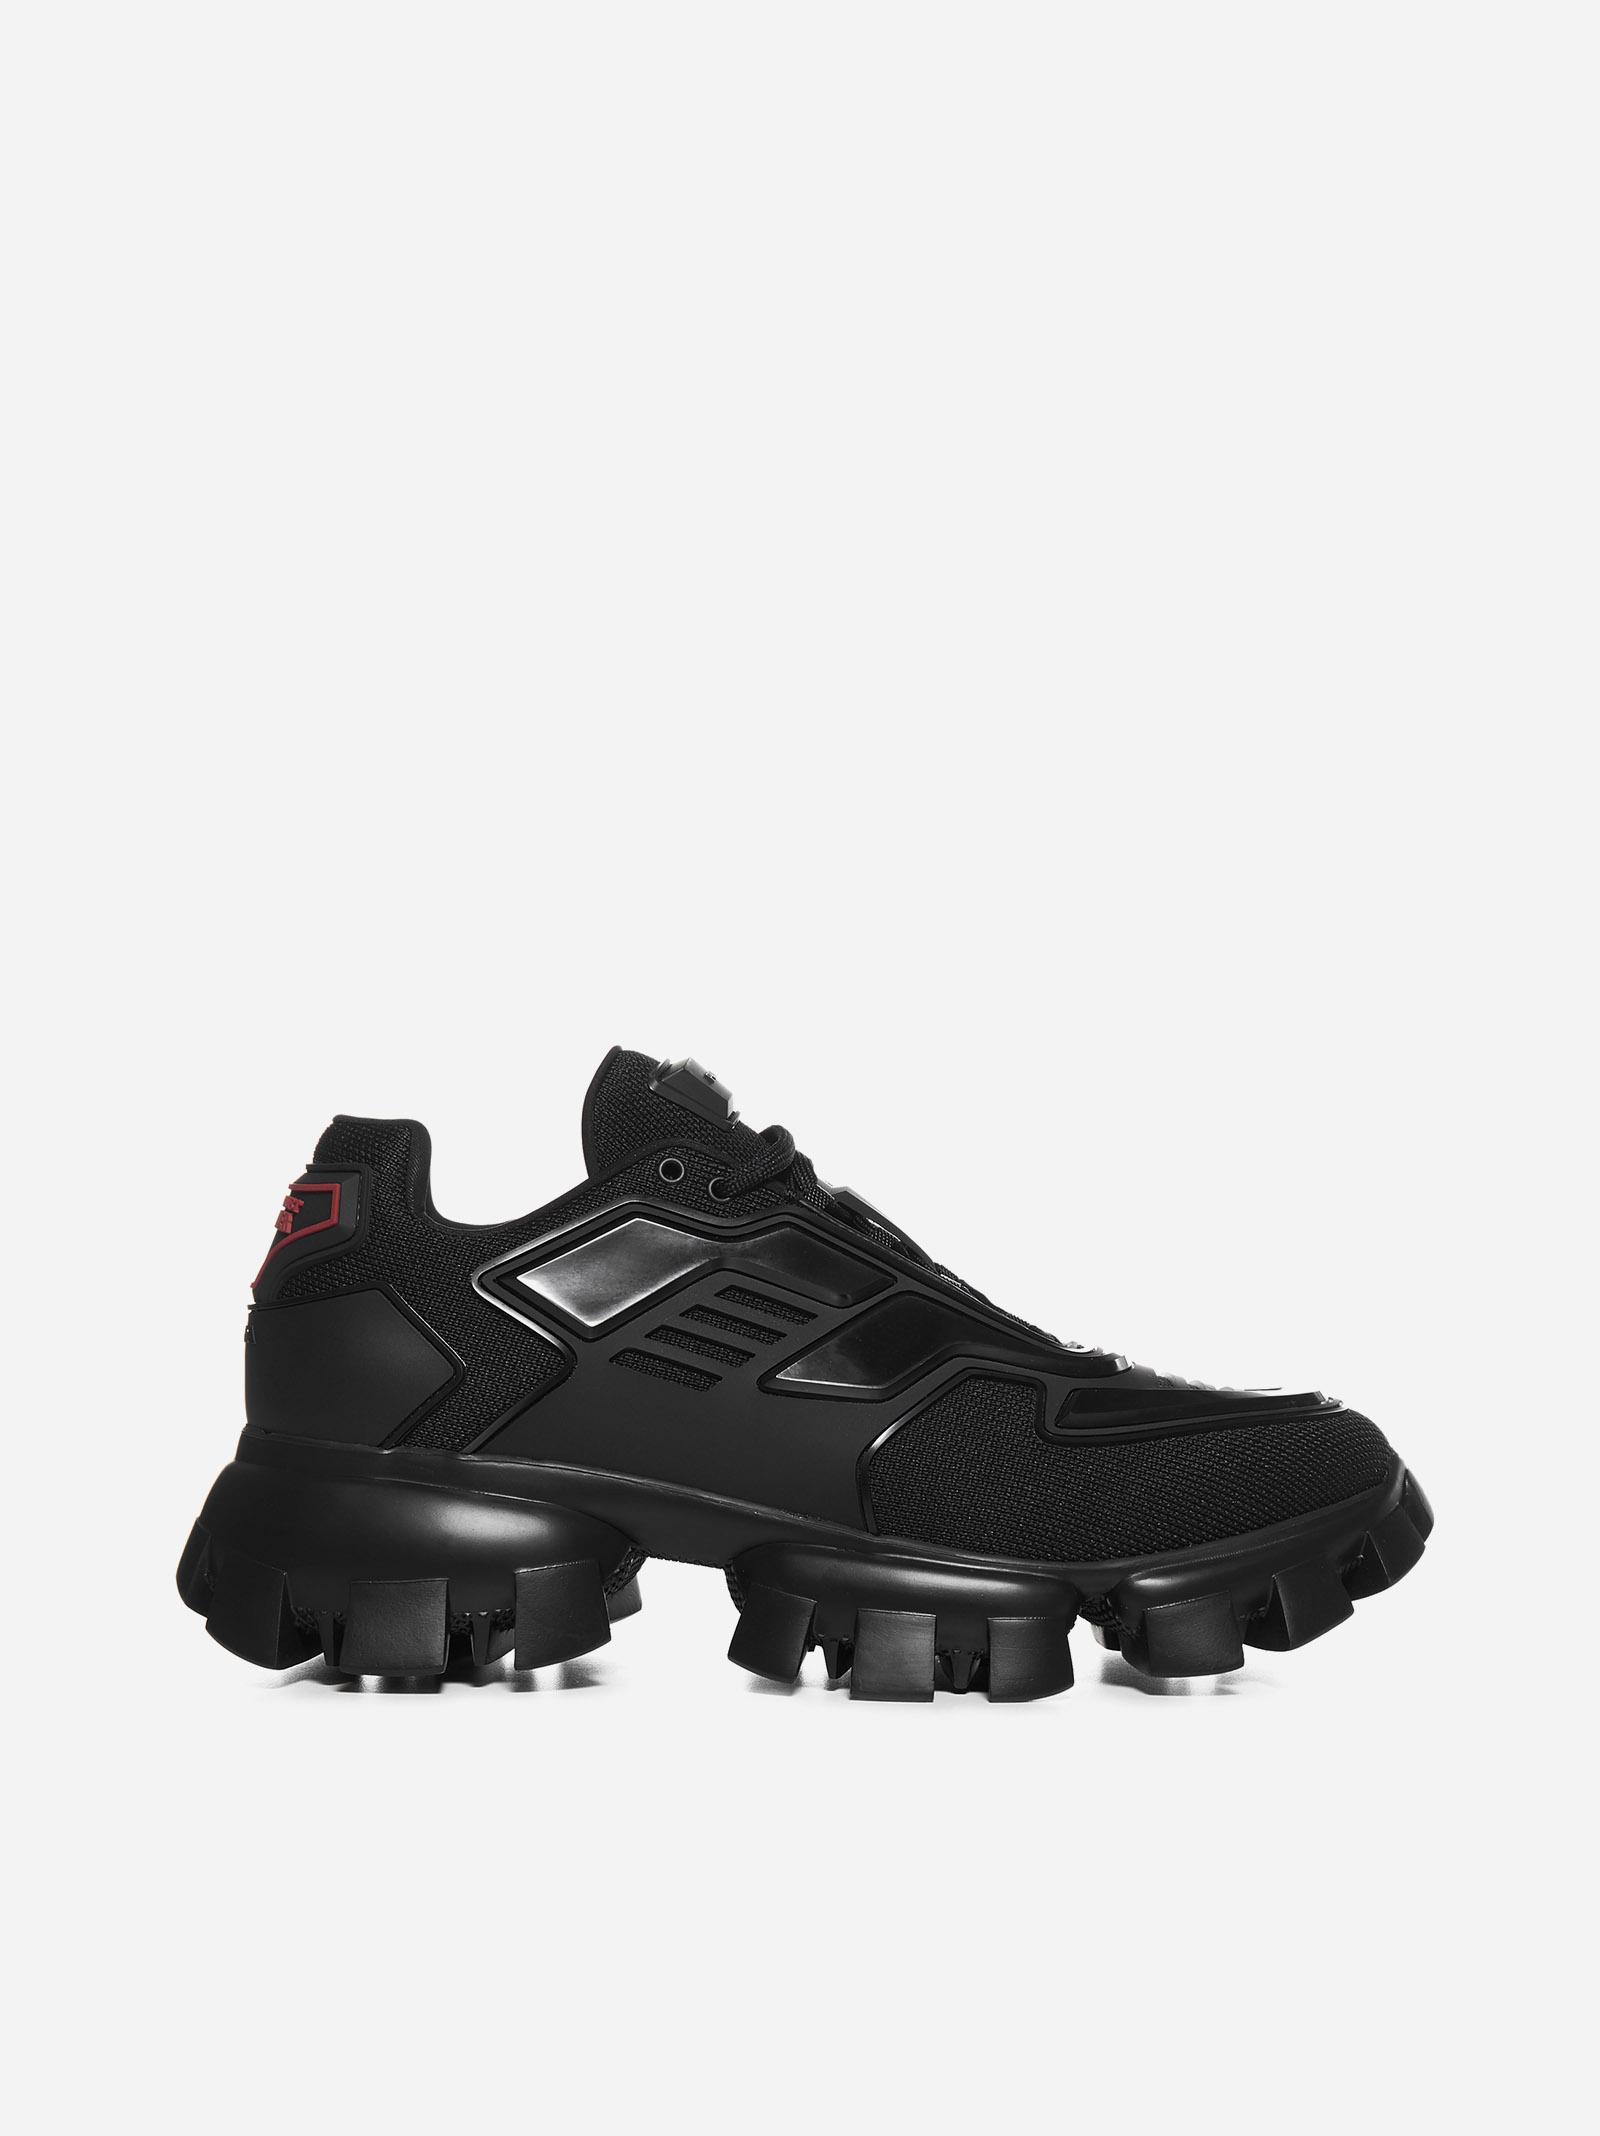 Prada Cloudbust Thunder Knit And Rubber Sneakers in Black for Men - Lyst